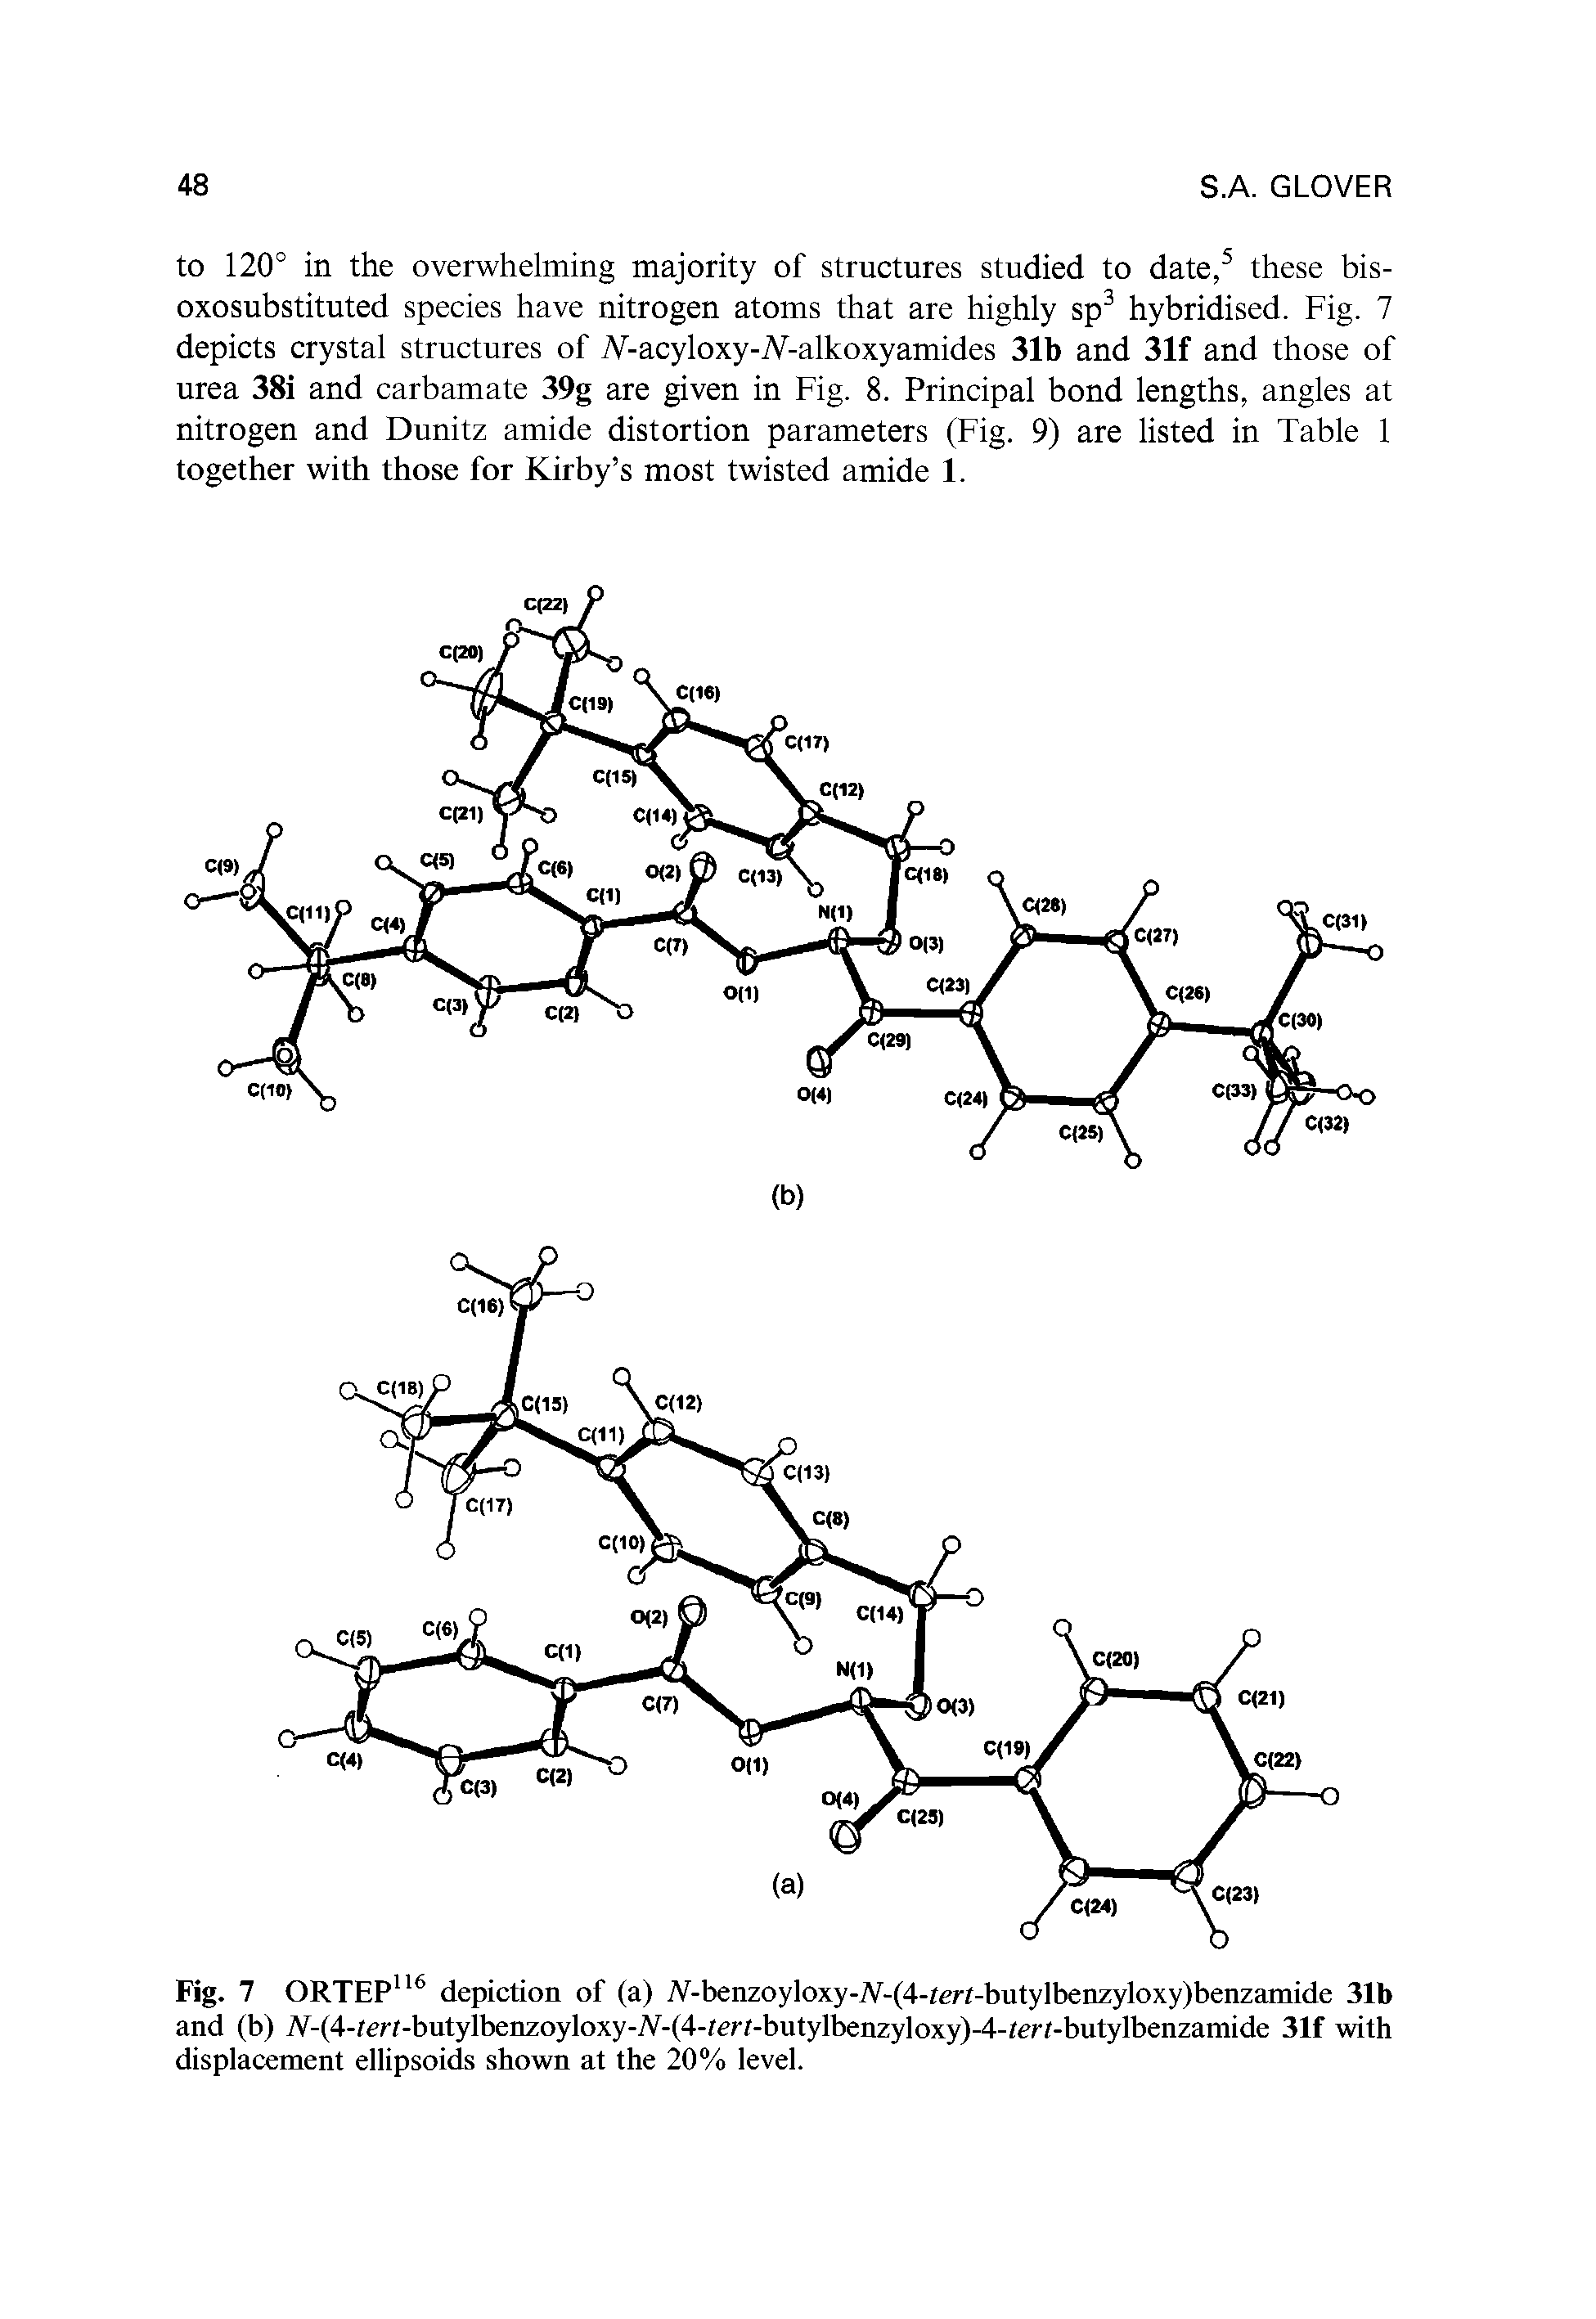 Fig. 7 ORTEP116 depiction of (a) 7V-benzoyloxy-iV-(4-tert-butylbenzyloxy)benzamide 31b and (b) /V-(4-zm-butylbenzoyloxy-iV-(4-zm-butylbenzyloxy)-4-/m-butylbenzamidc 31f with displacement ellipsoids shown at the 20% level.